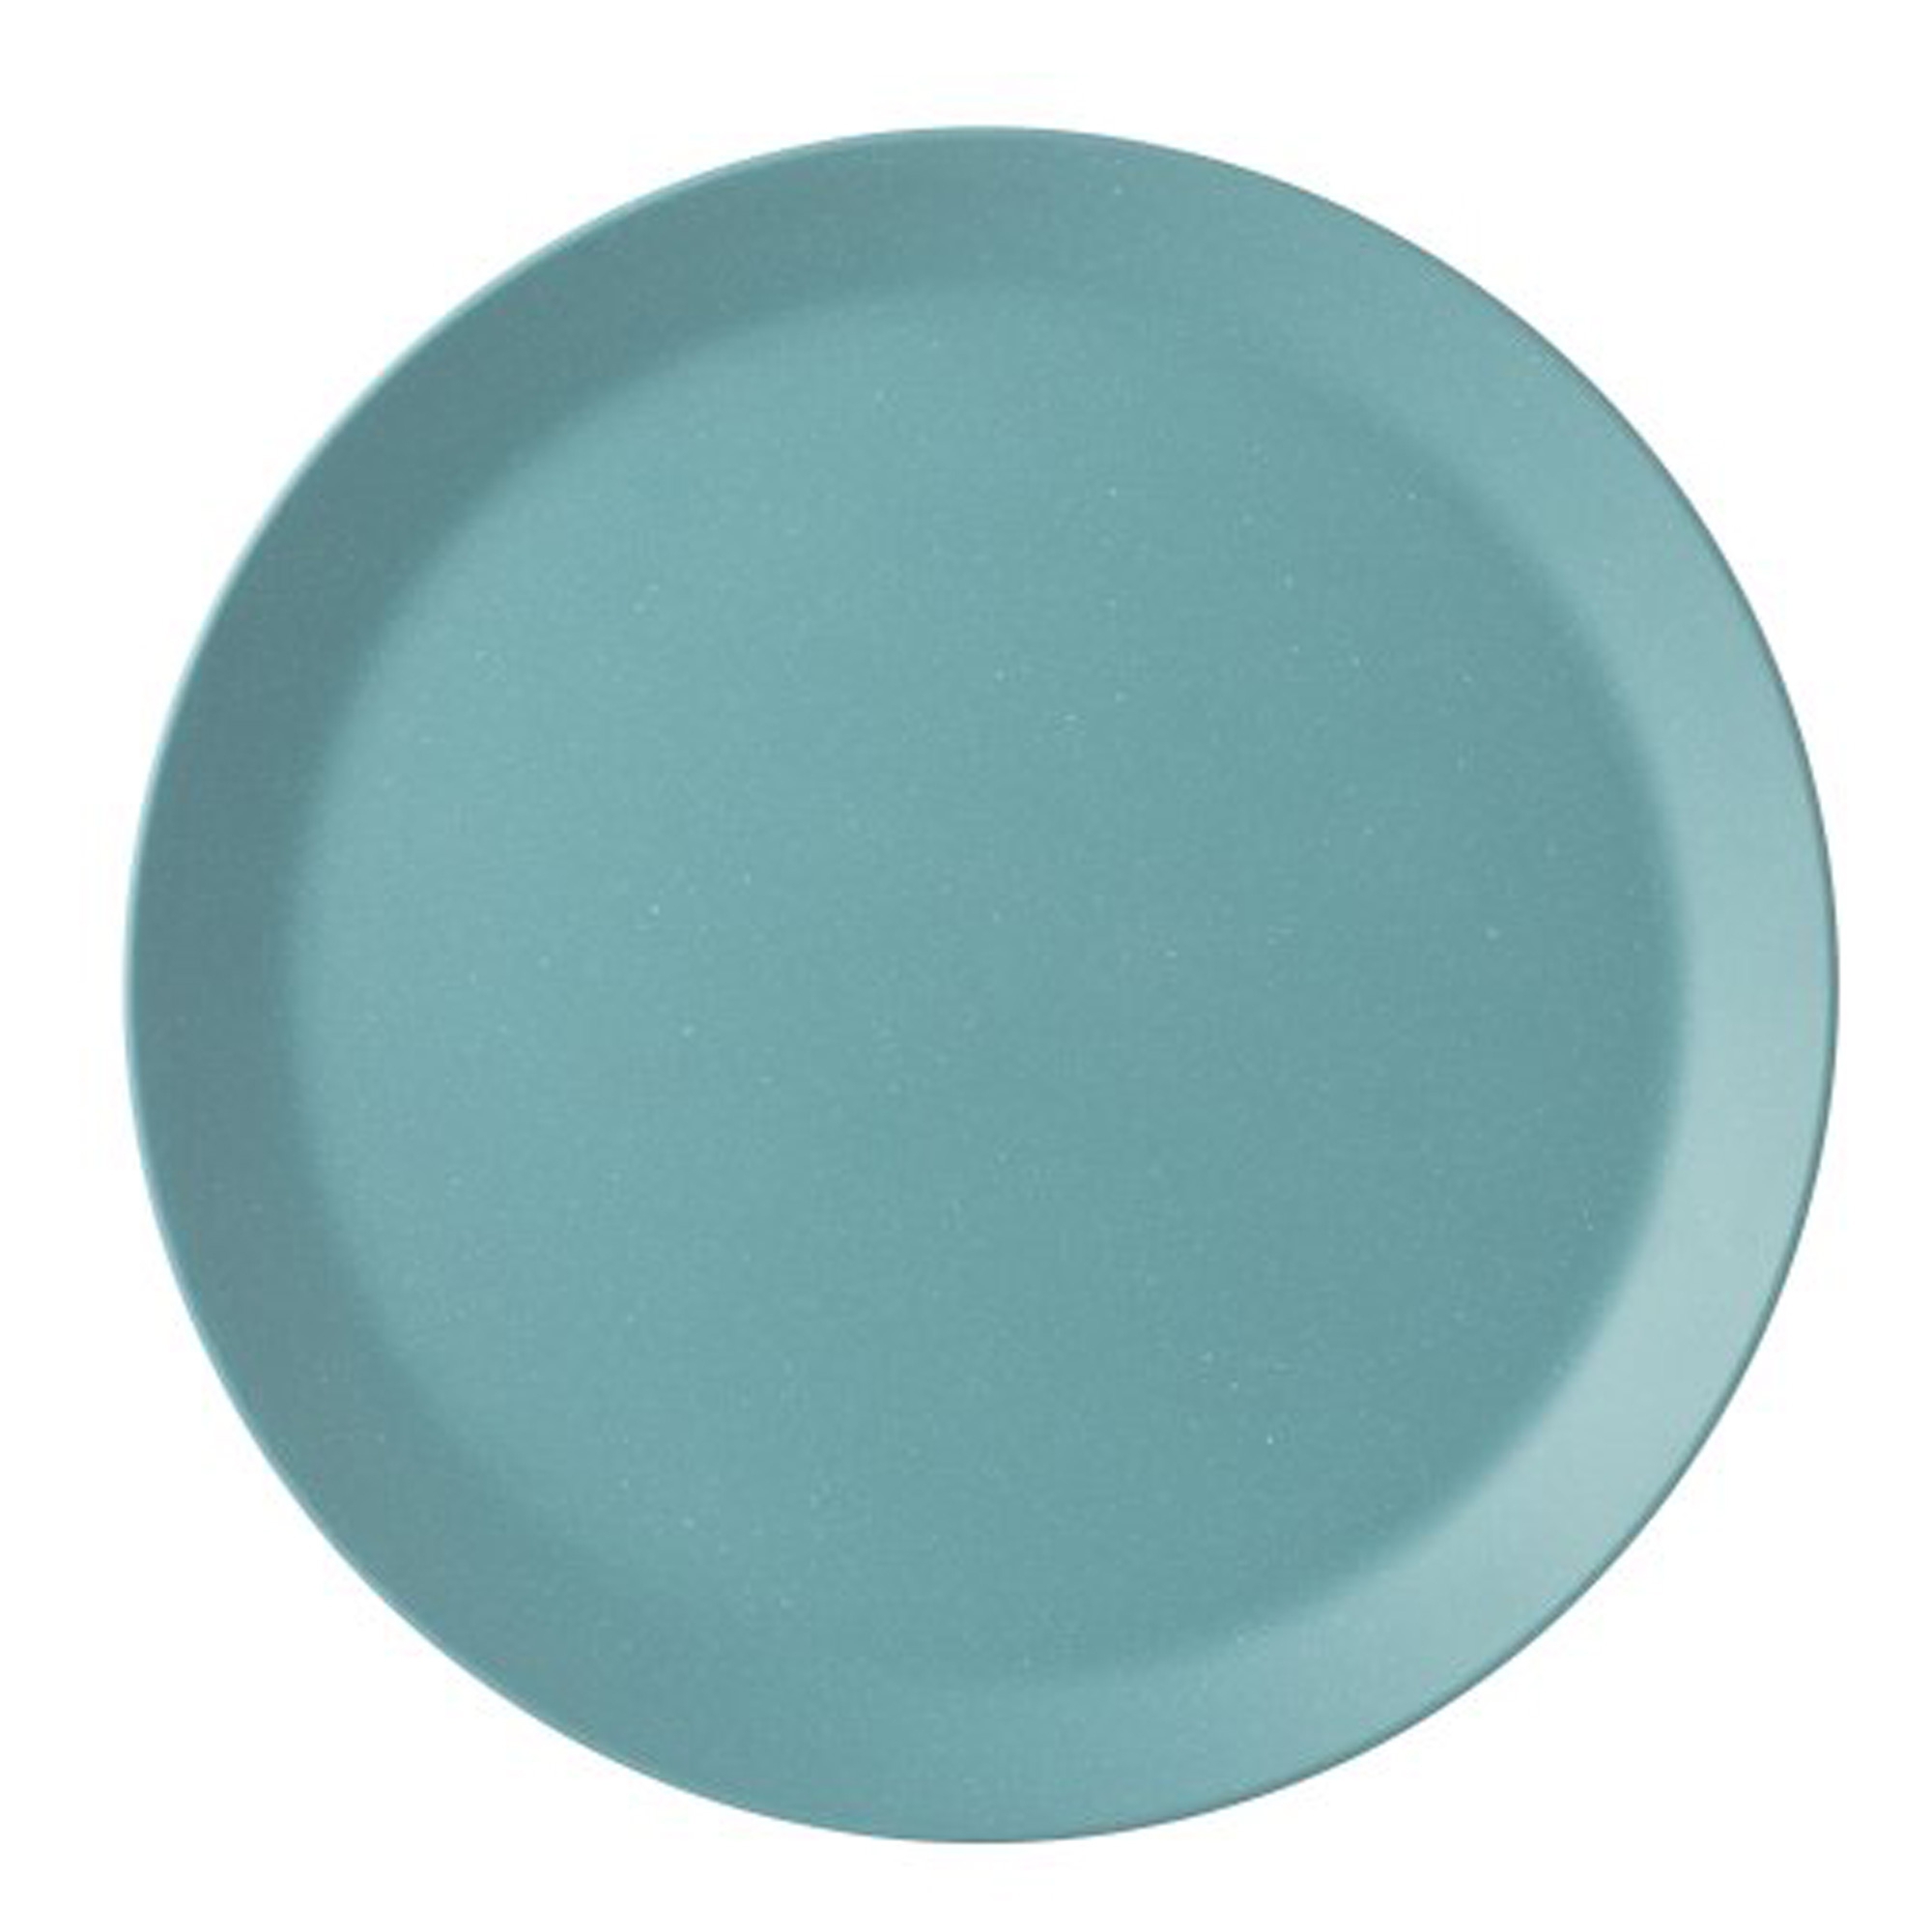 Mepal - Bloom Dinner Plate - different colors